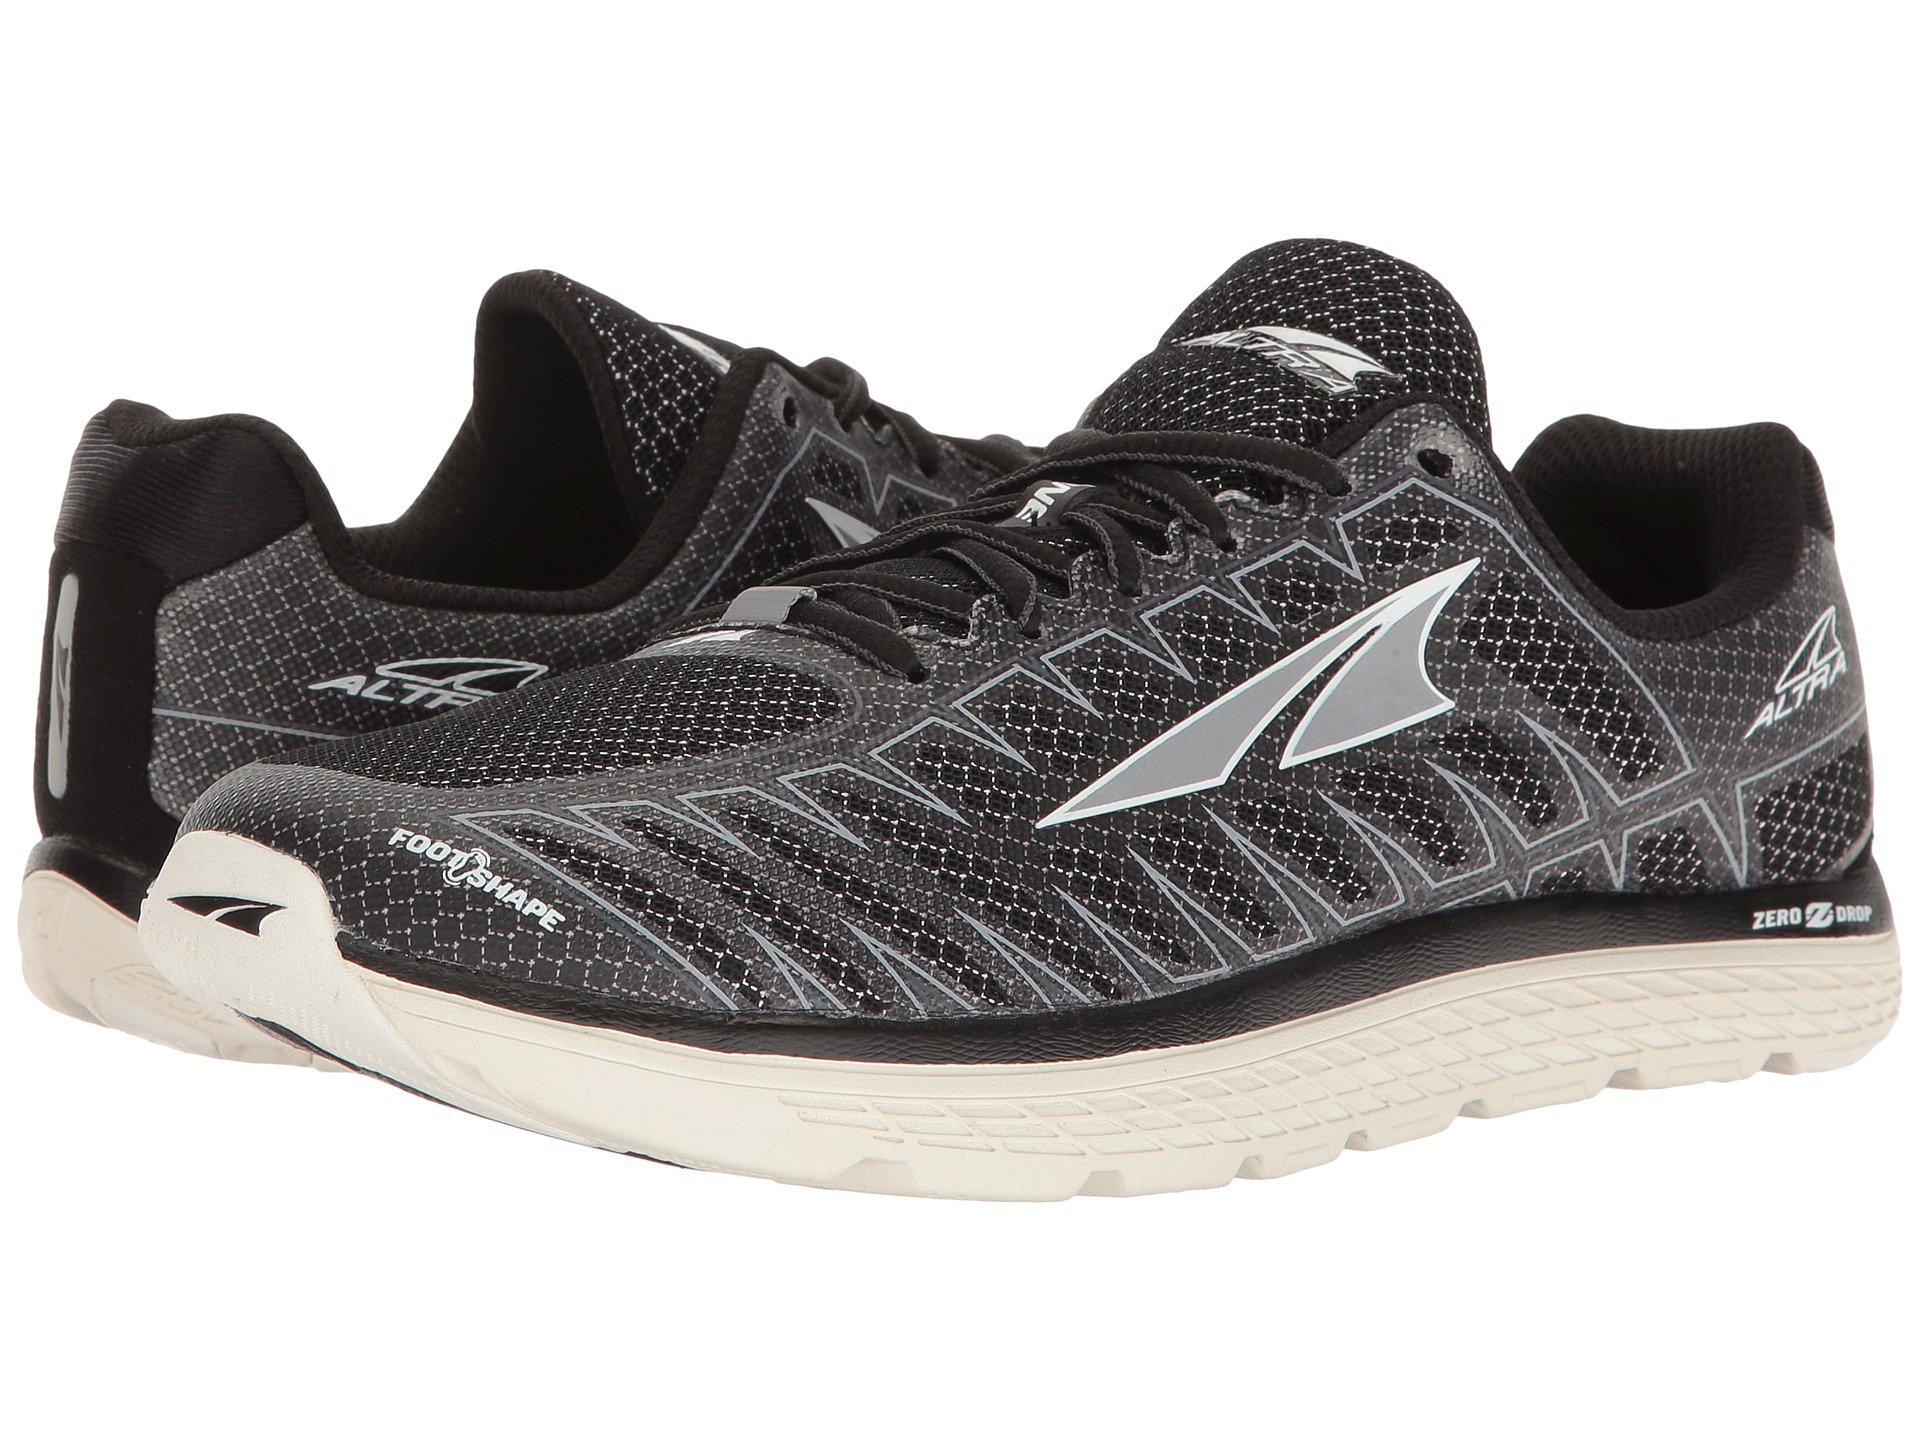 Lyst - Altra One V3 (black) Women's Running Shoes in Black - Save 46%